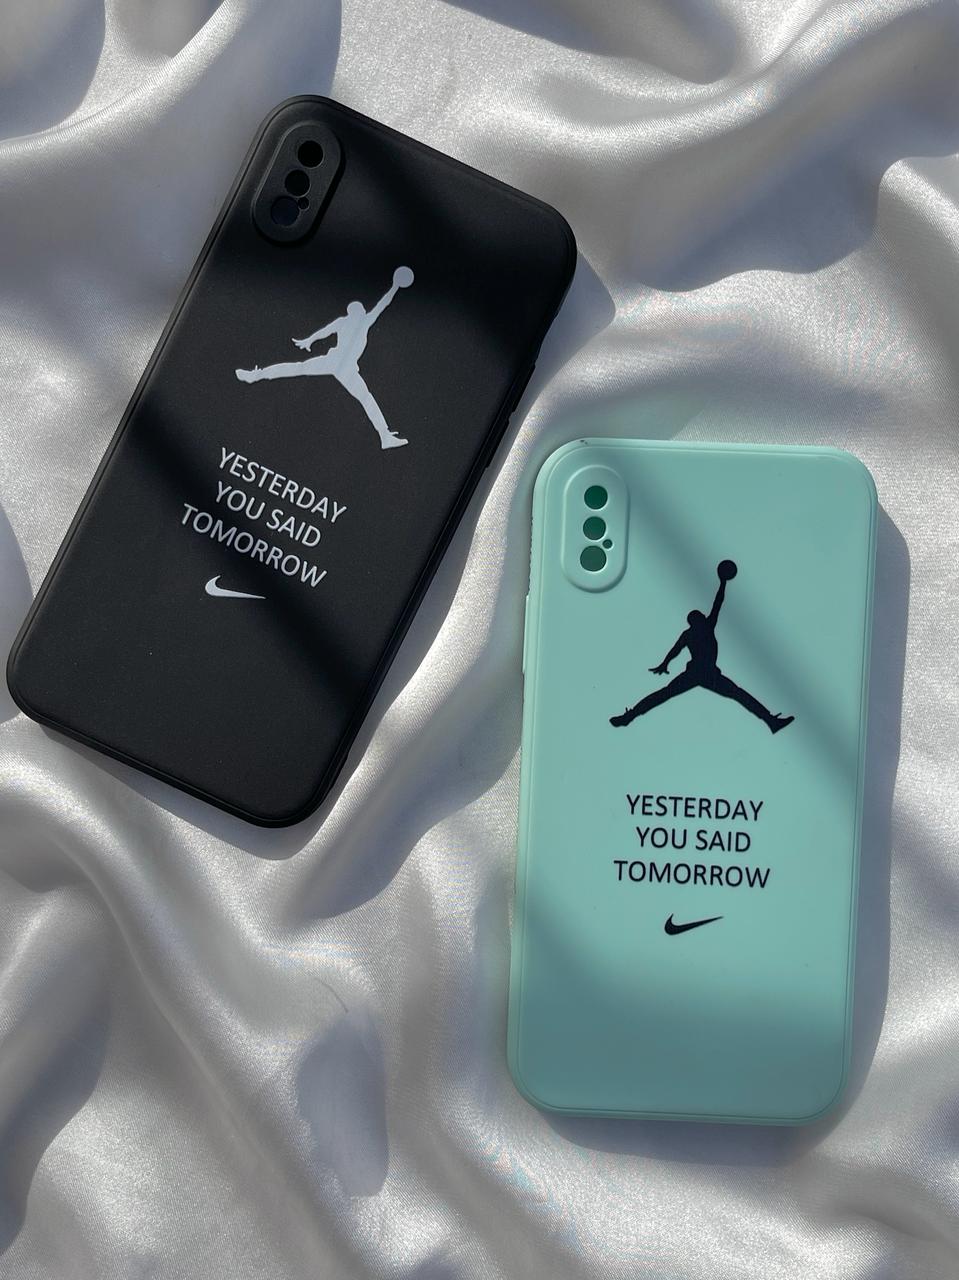 iPhone "X/XS" Silicone Case "Yesterday You Said Tomorrow" Edition